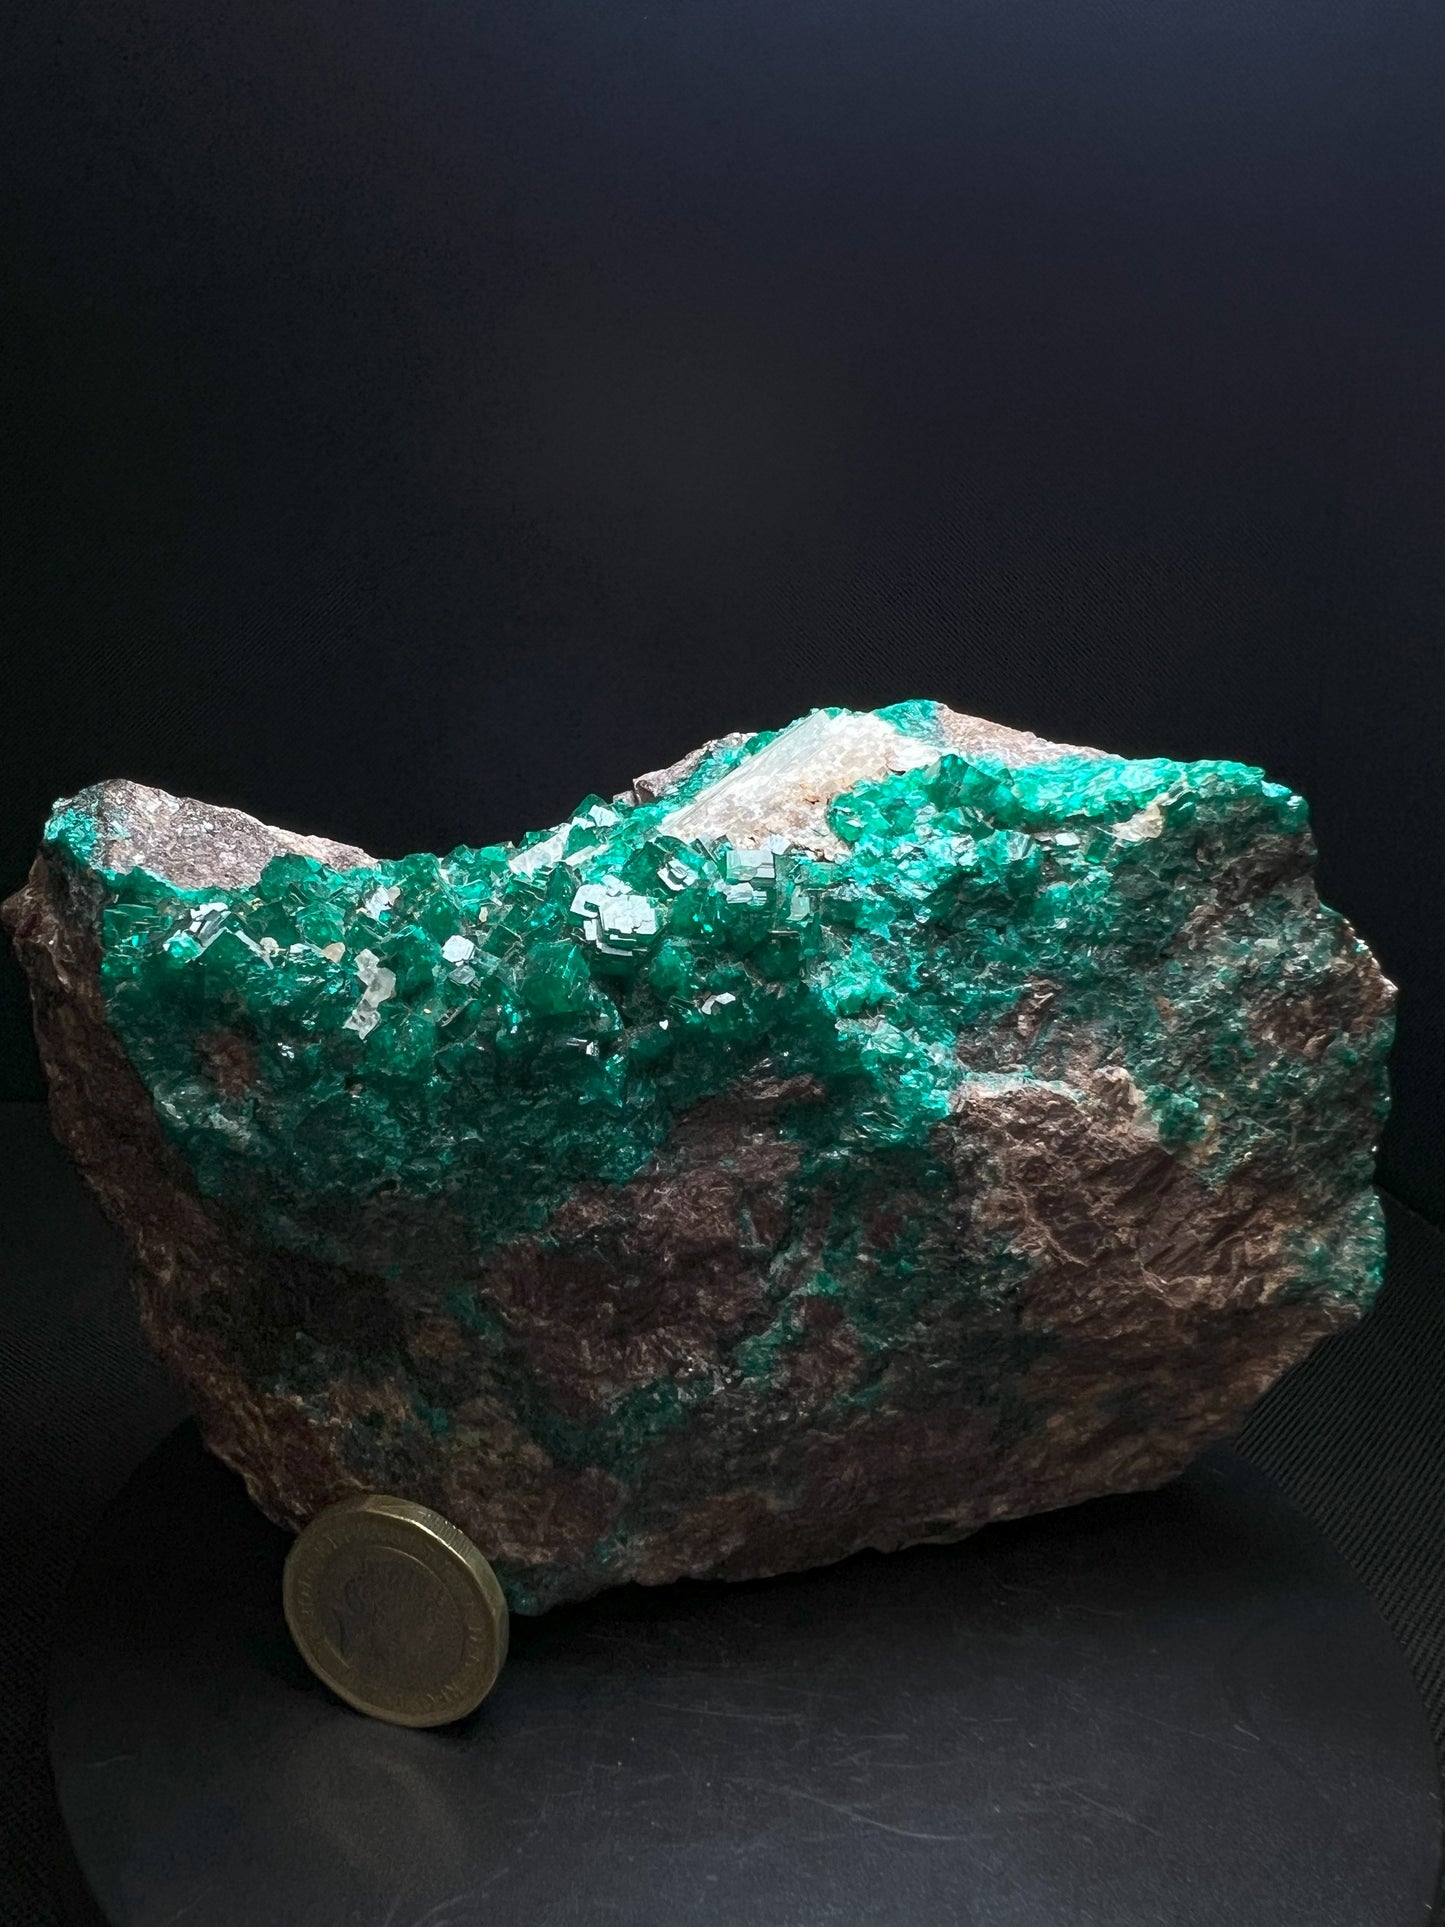 Outstanding Large Dioptase With Calcite On Matrix From Tsumeb Mine, Namibia- Collectors Piece